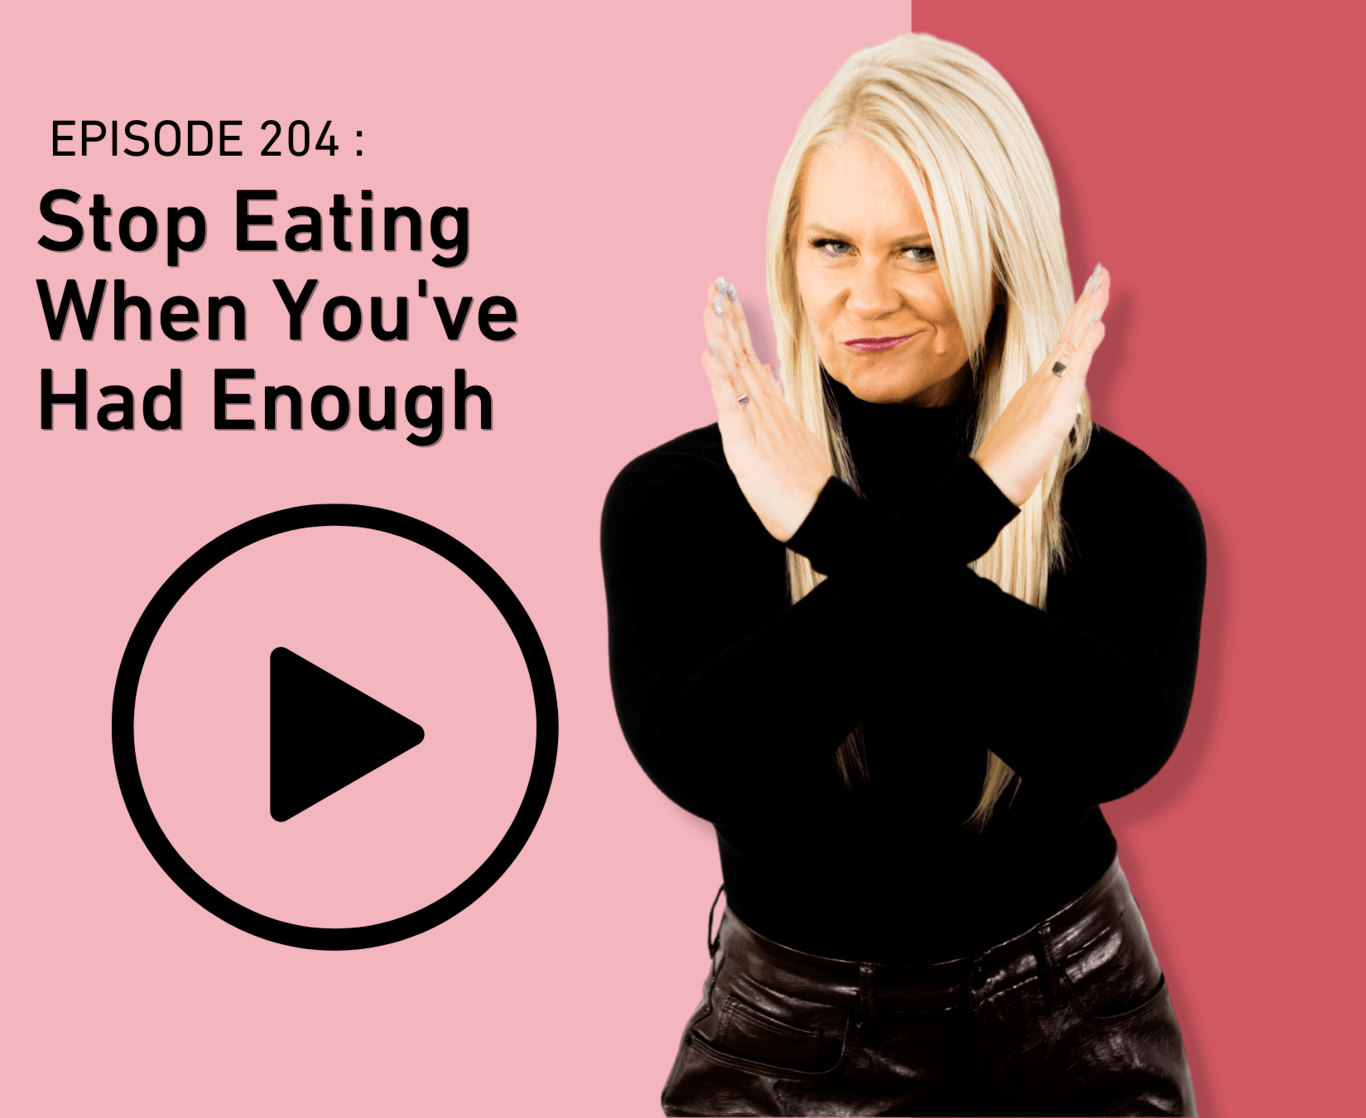 Stop eating when you've had enough.